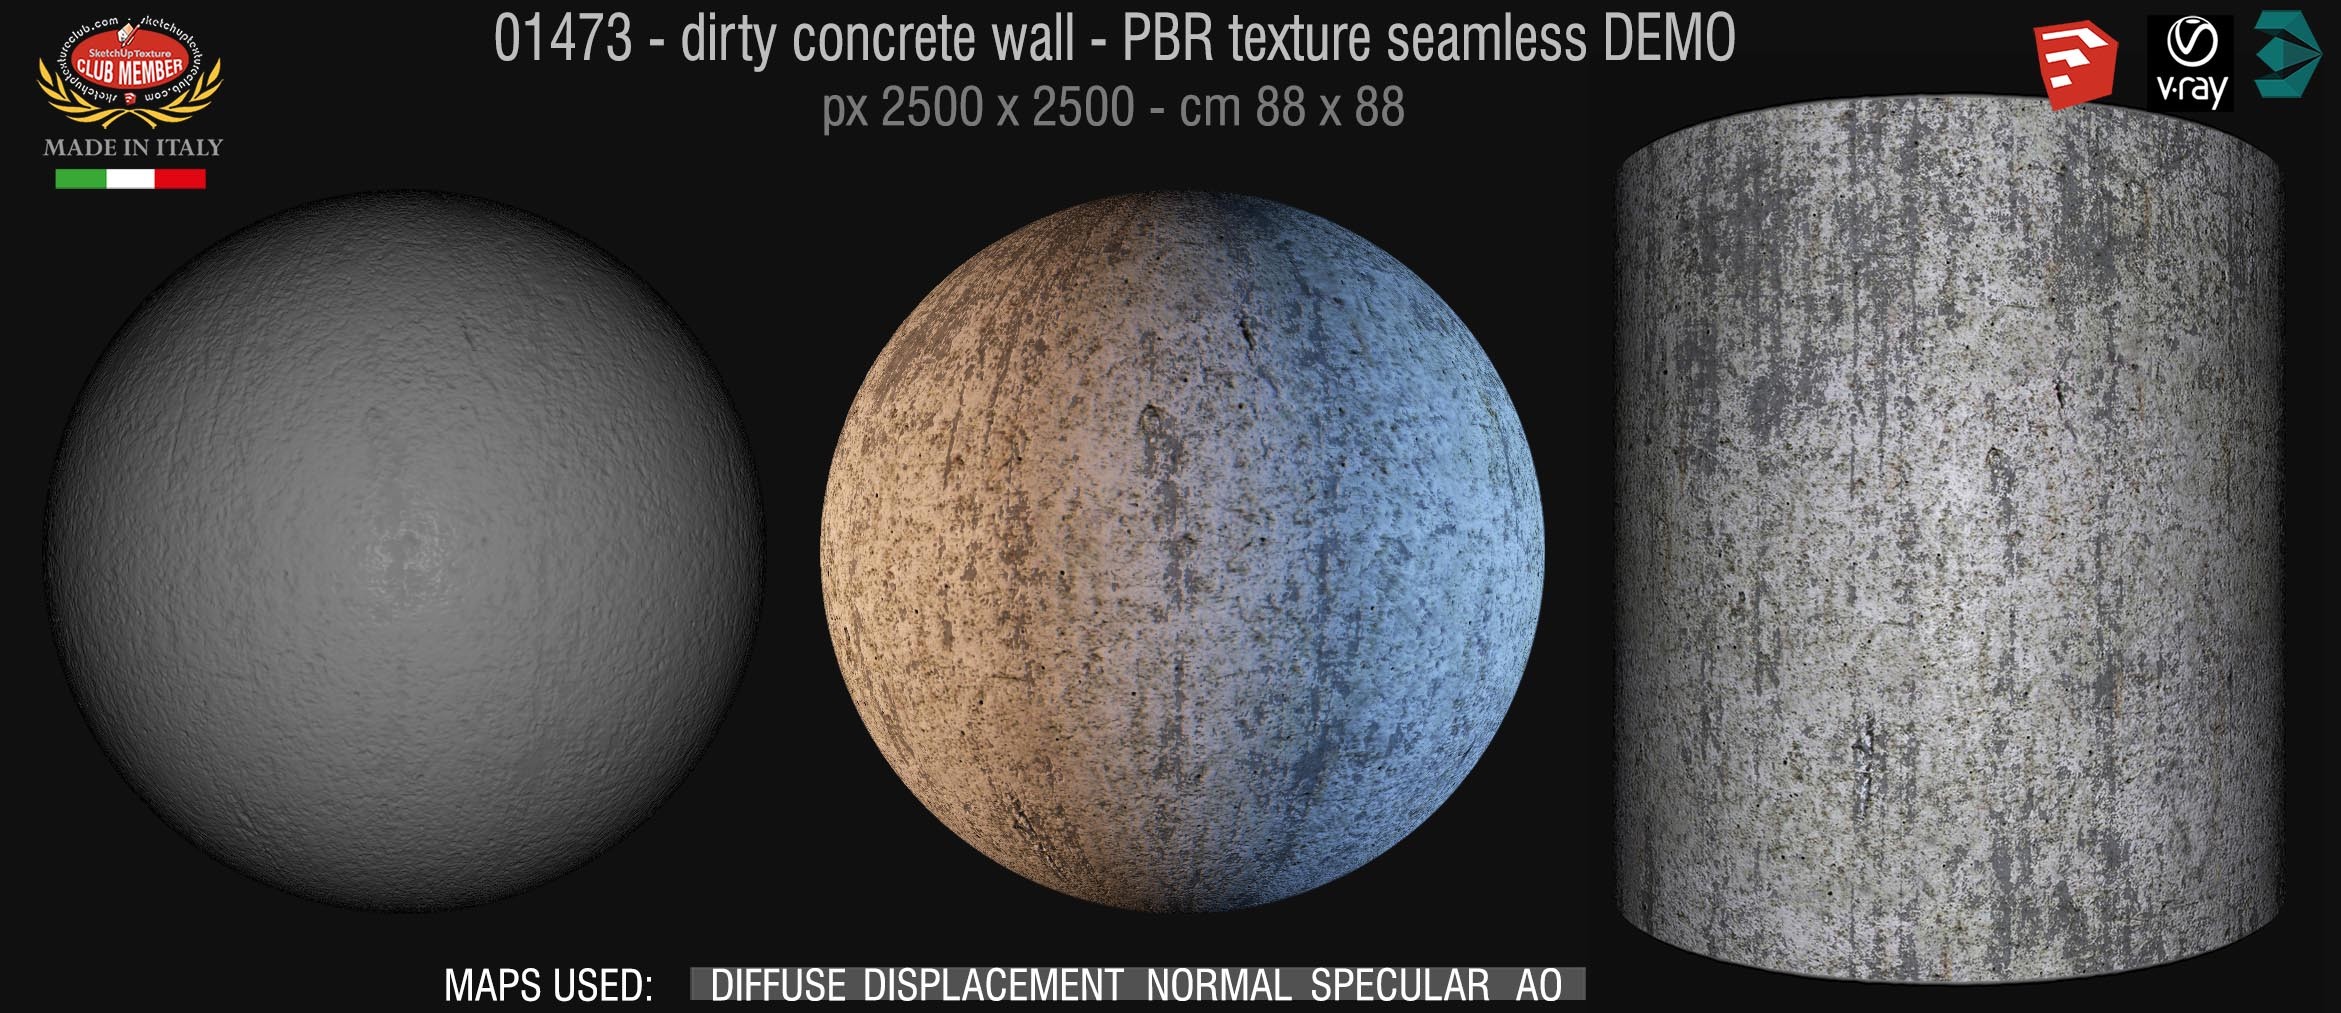 01473 Concrete bare dirty wall PBR texture seamless DEMO